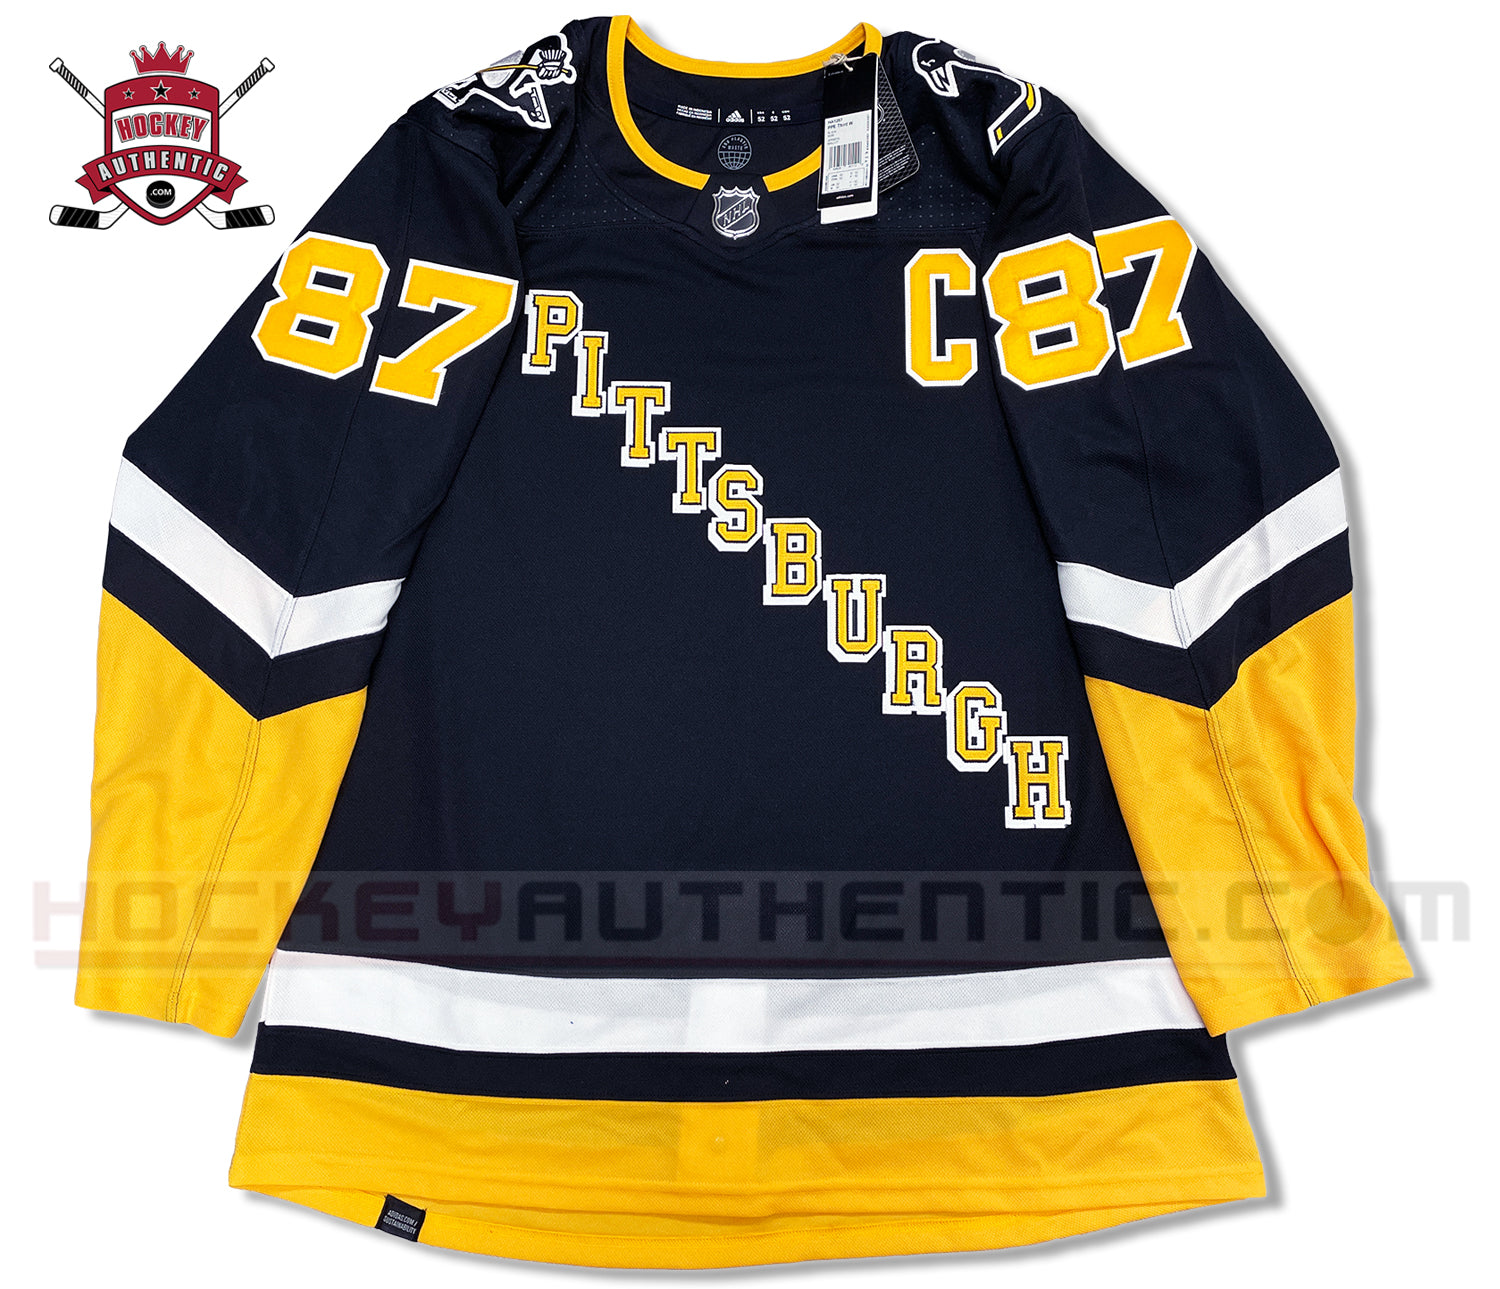 Sidney Crosby has specialized Pittsburgh Penguins jersey made to